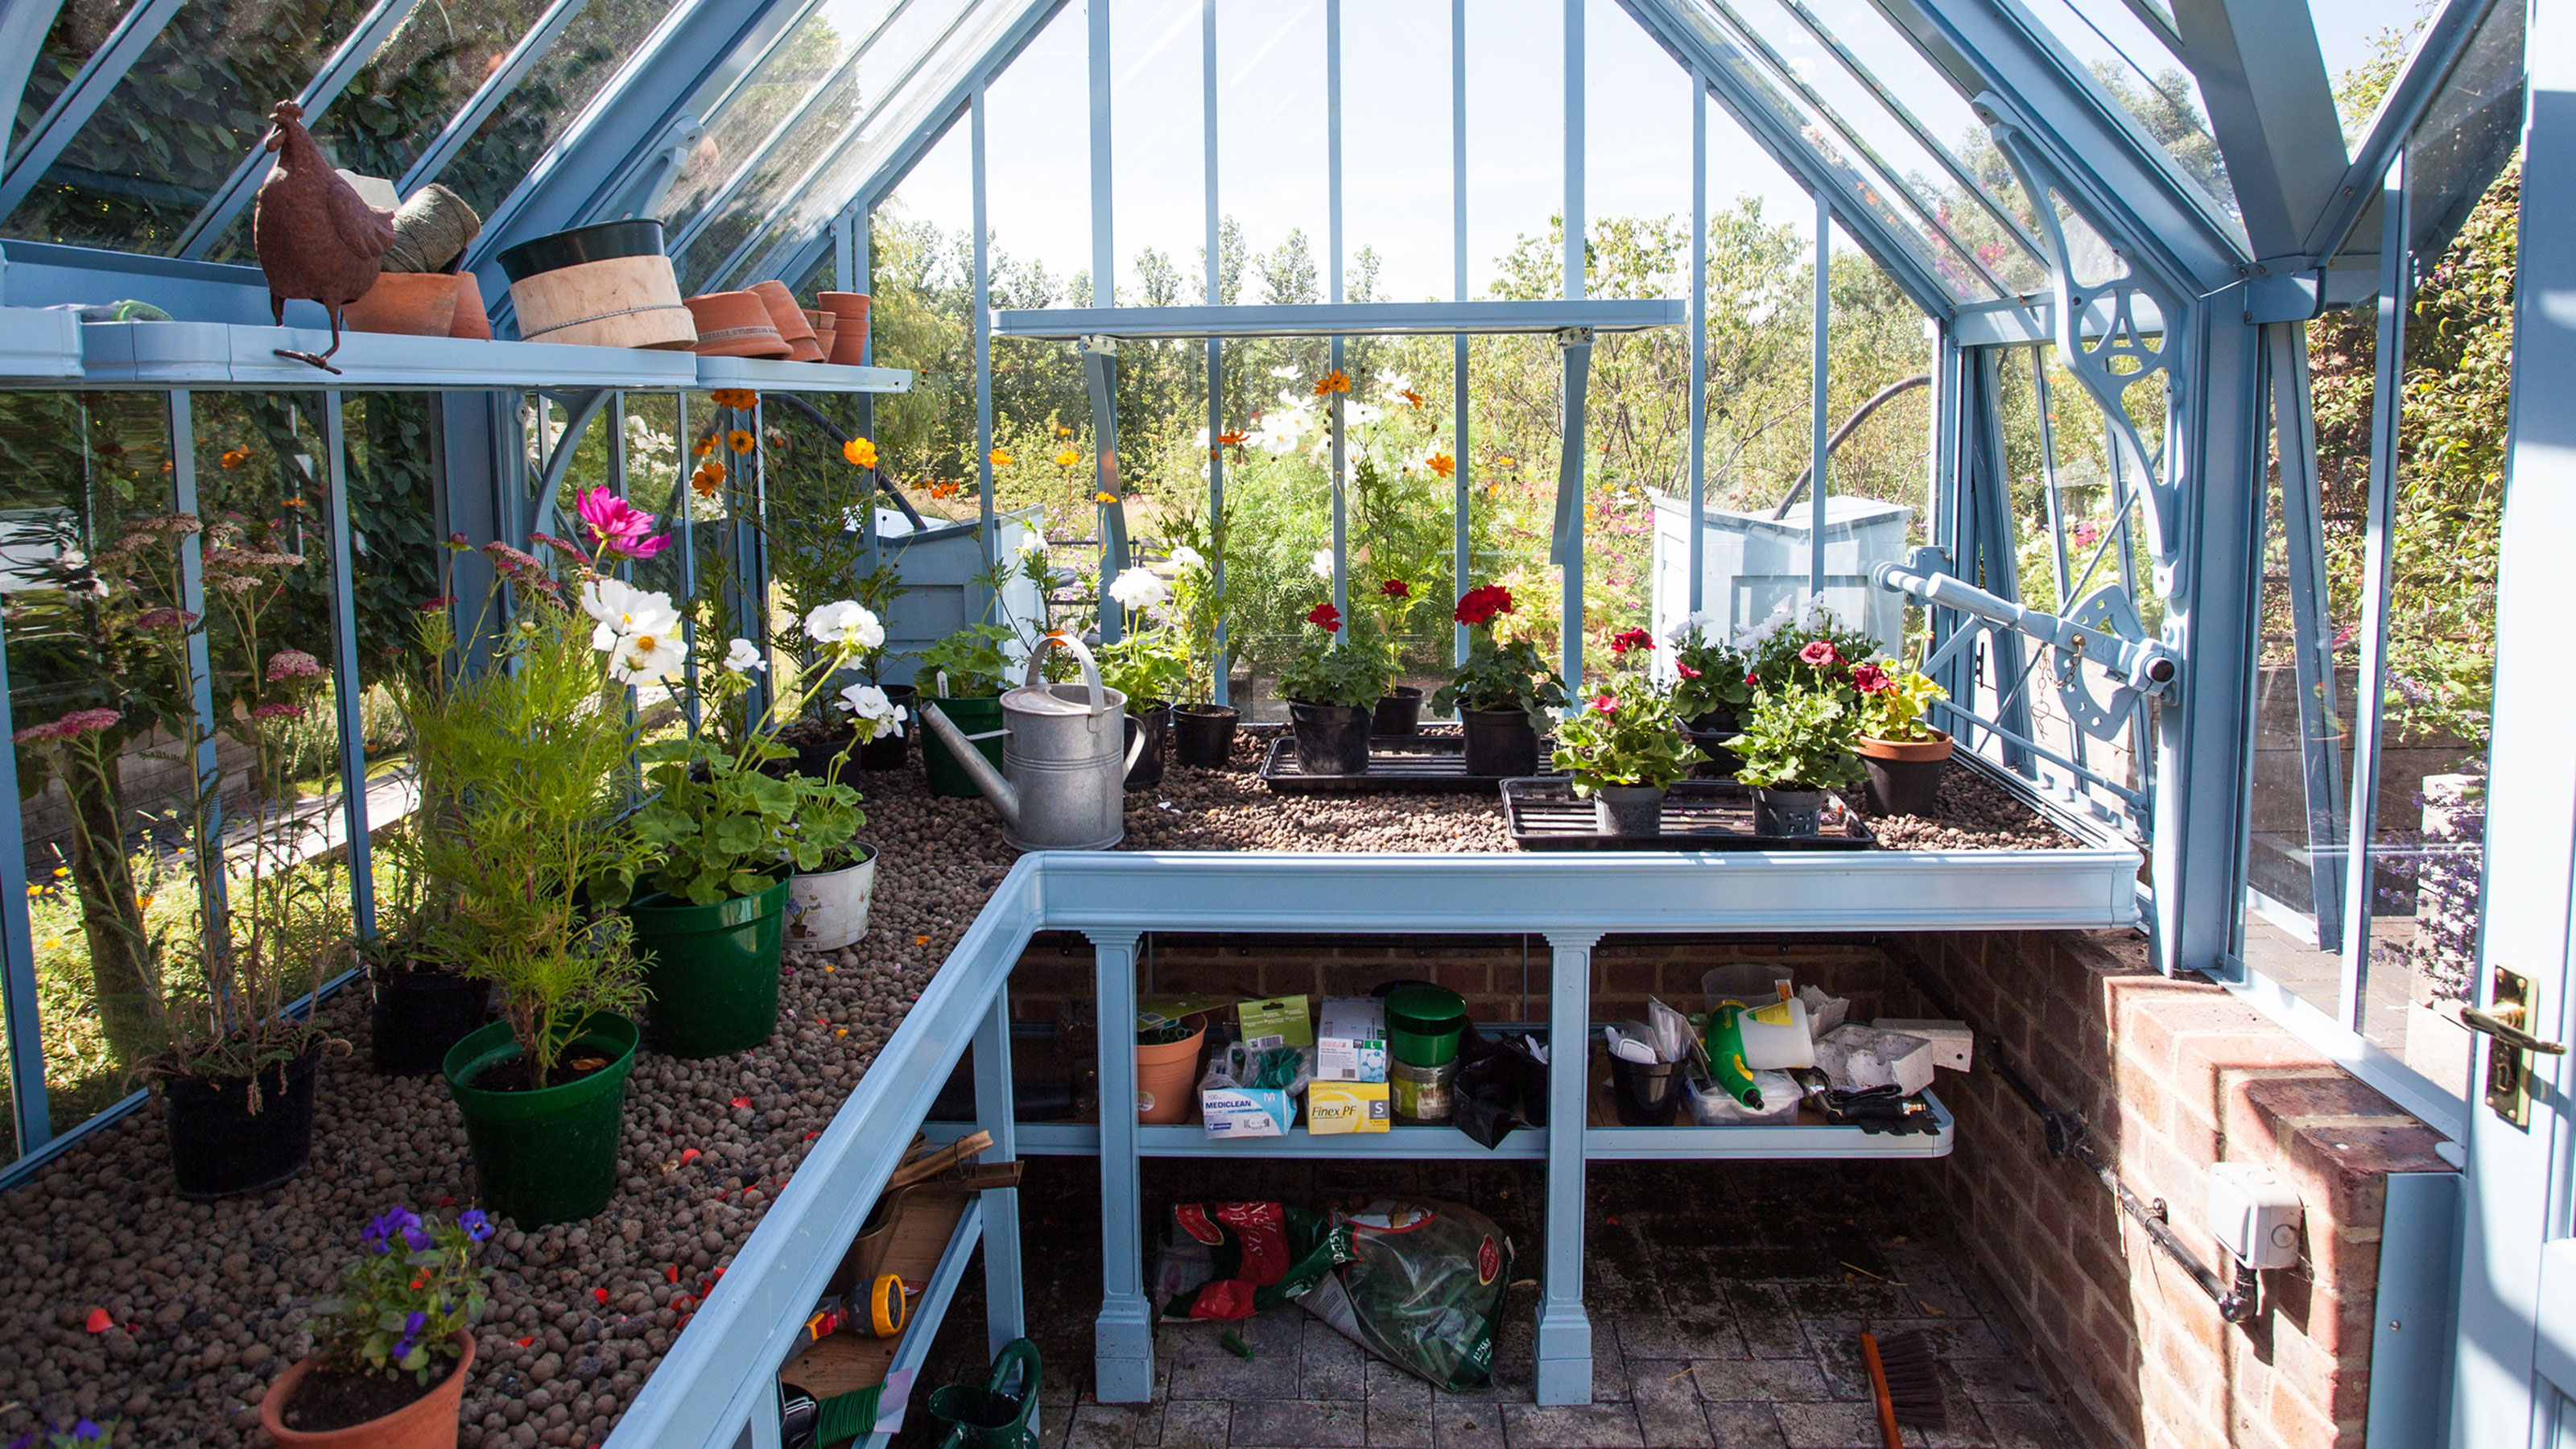 Greenhouse Shelving Ideas: 10 Ways To Store Plants And Tools | Gardeningetc